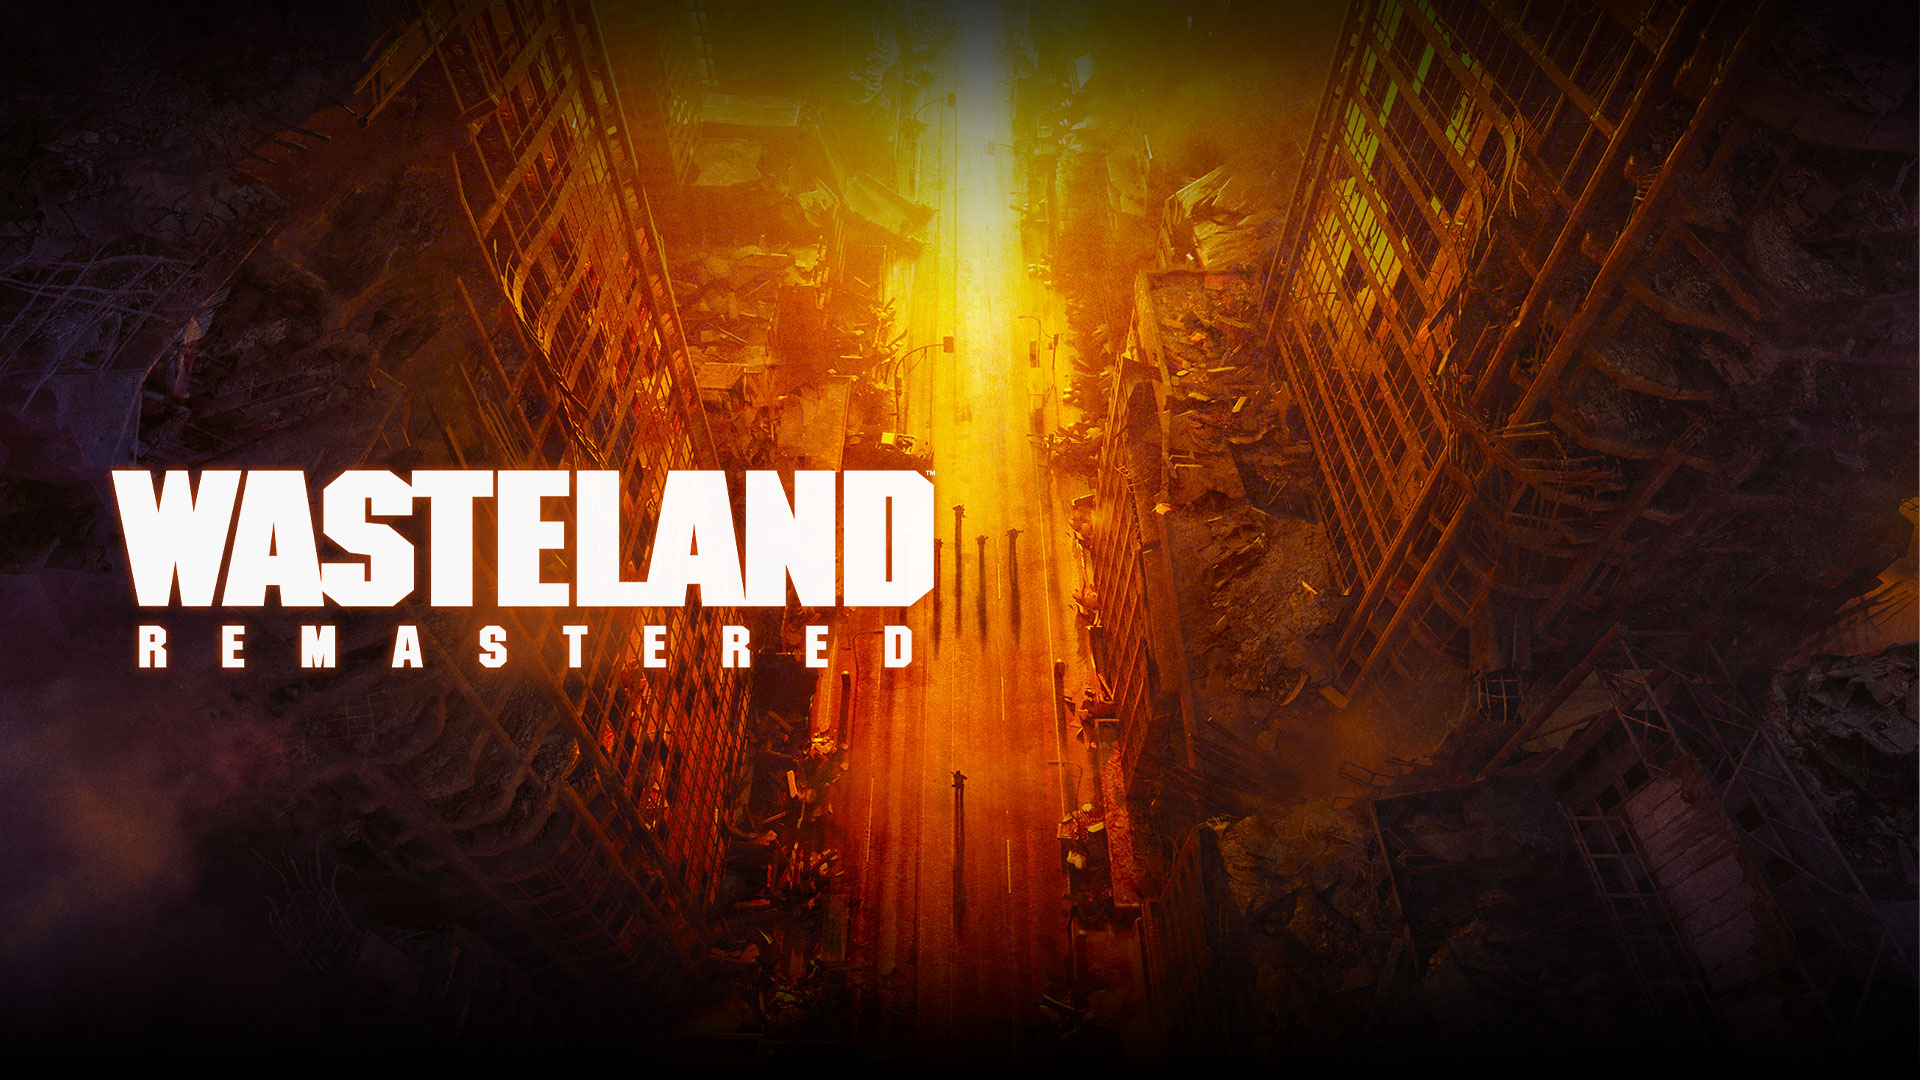 Wasteland Remastered, top view of ruined buildings and people on the street in yellow, orange, and red hues